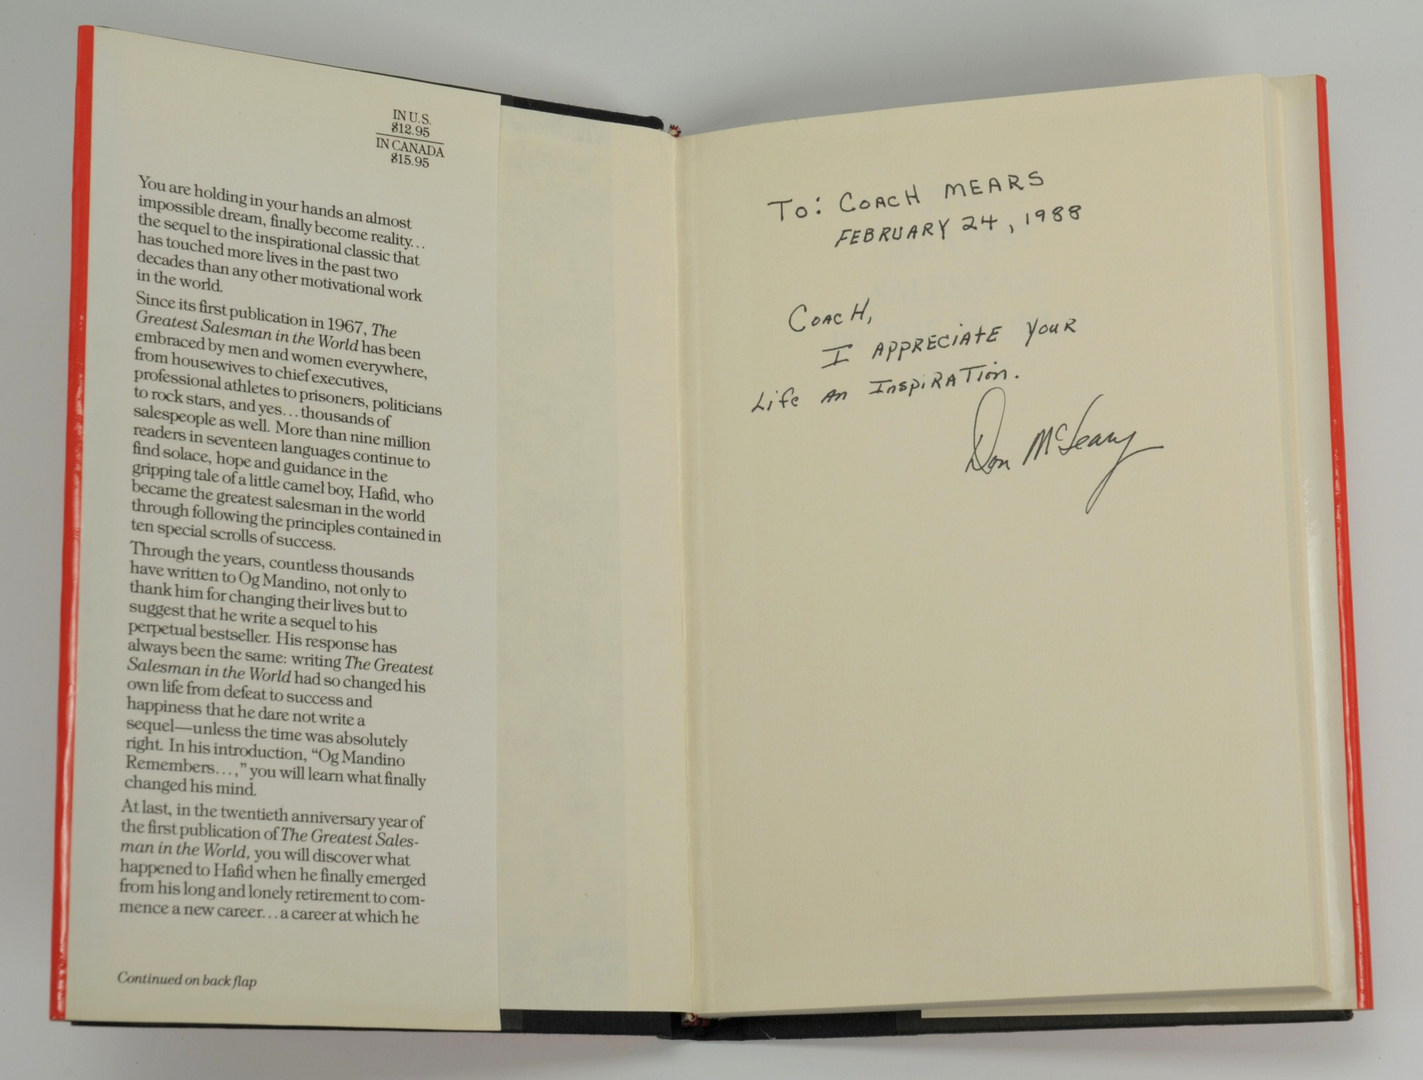 Lot 604: Collection of 9 signed books to Ray Mears